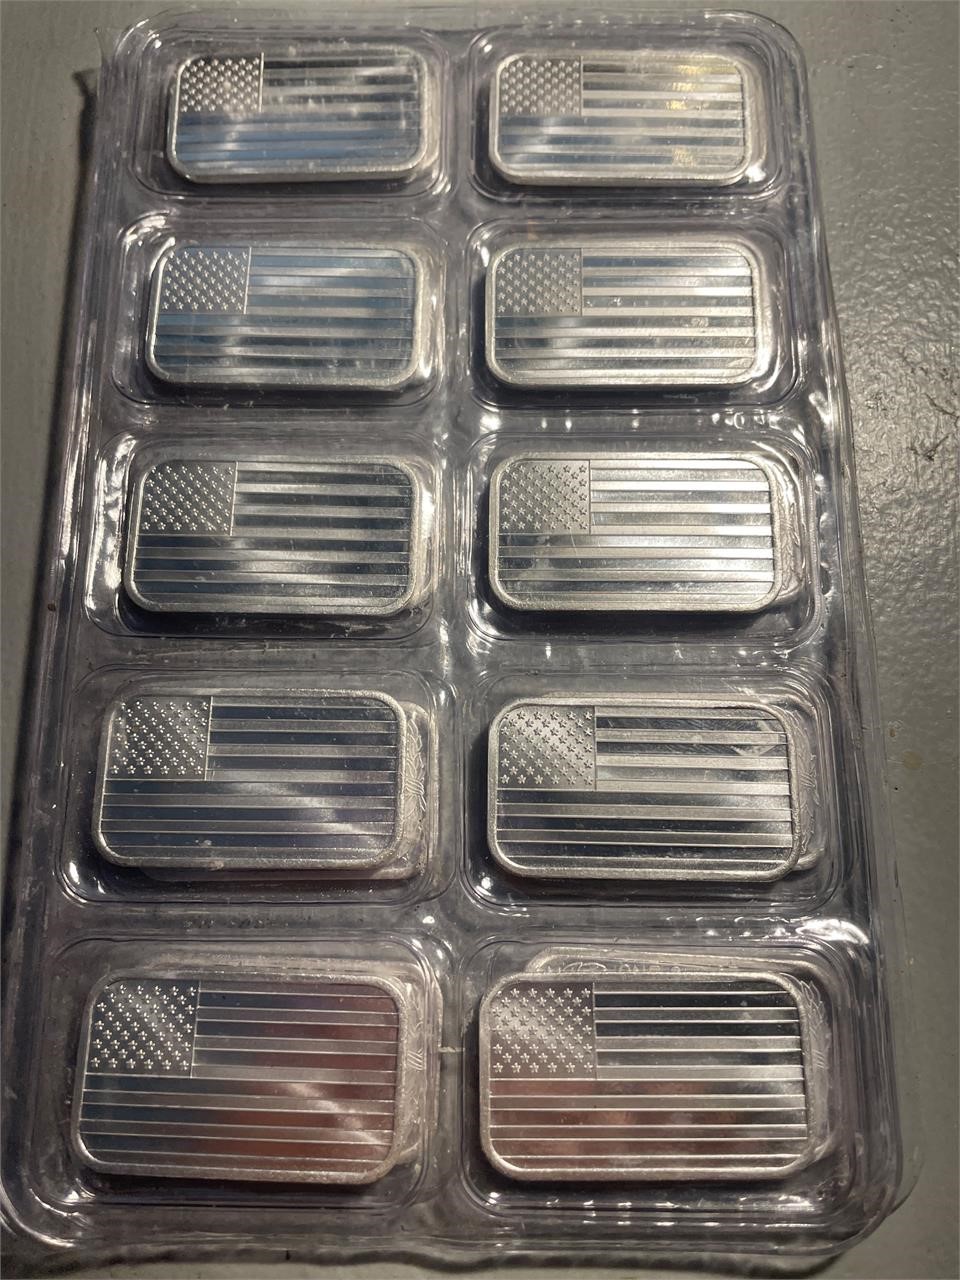 Quantity of (10) 1 Ounce Silver American Flag Bars